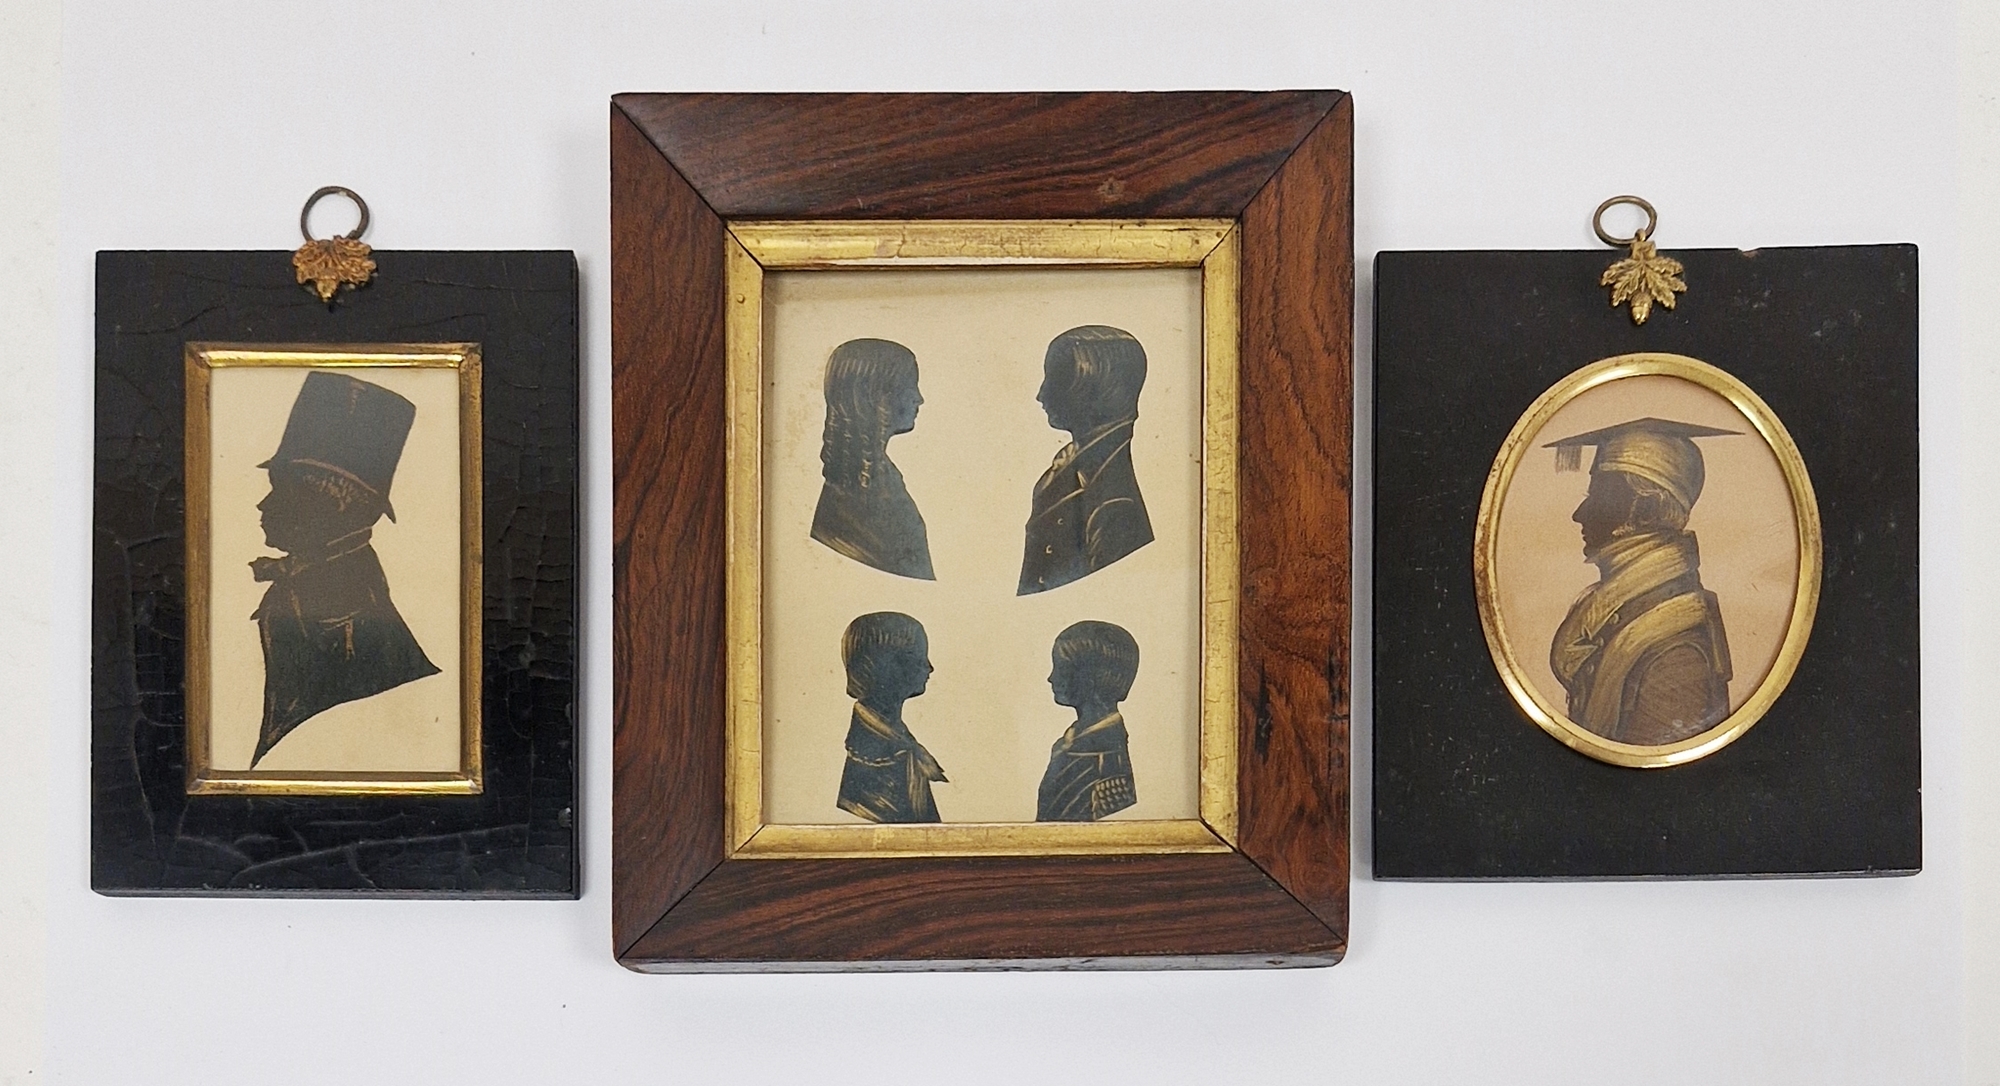 19th century silhouette on card, four busts of children with gilt highlights, framed and glazed,